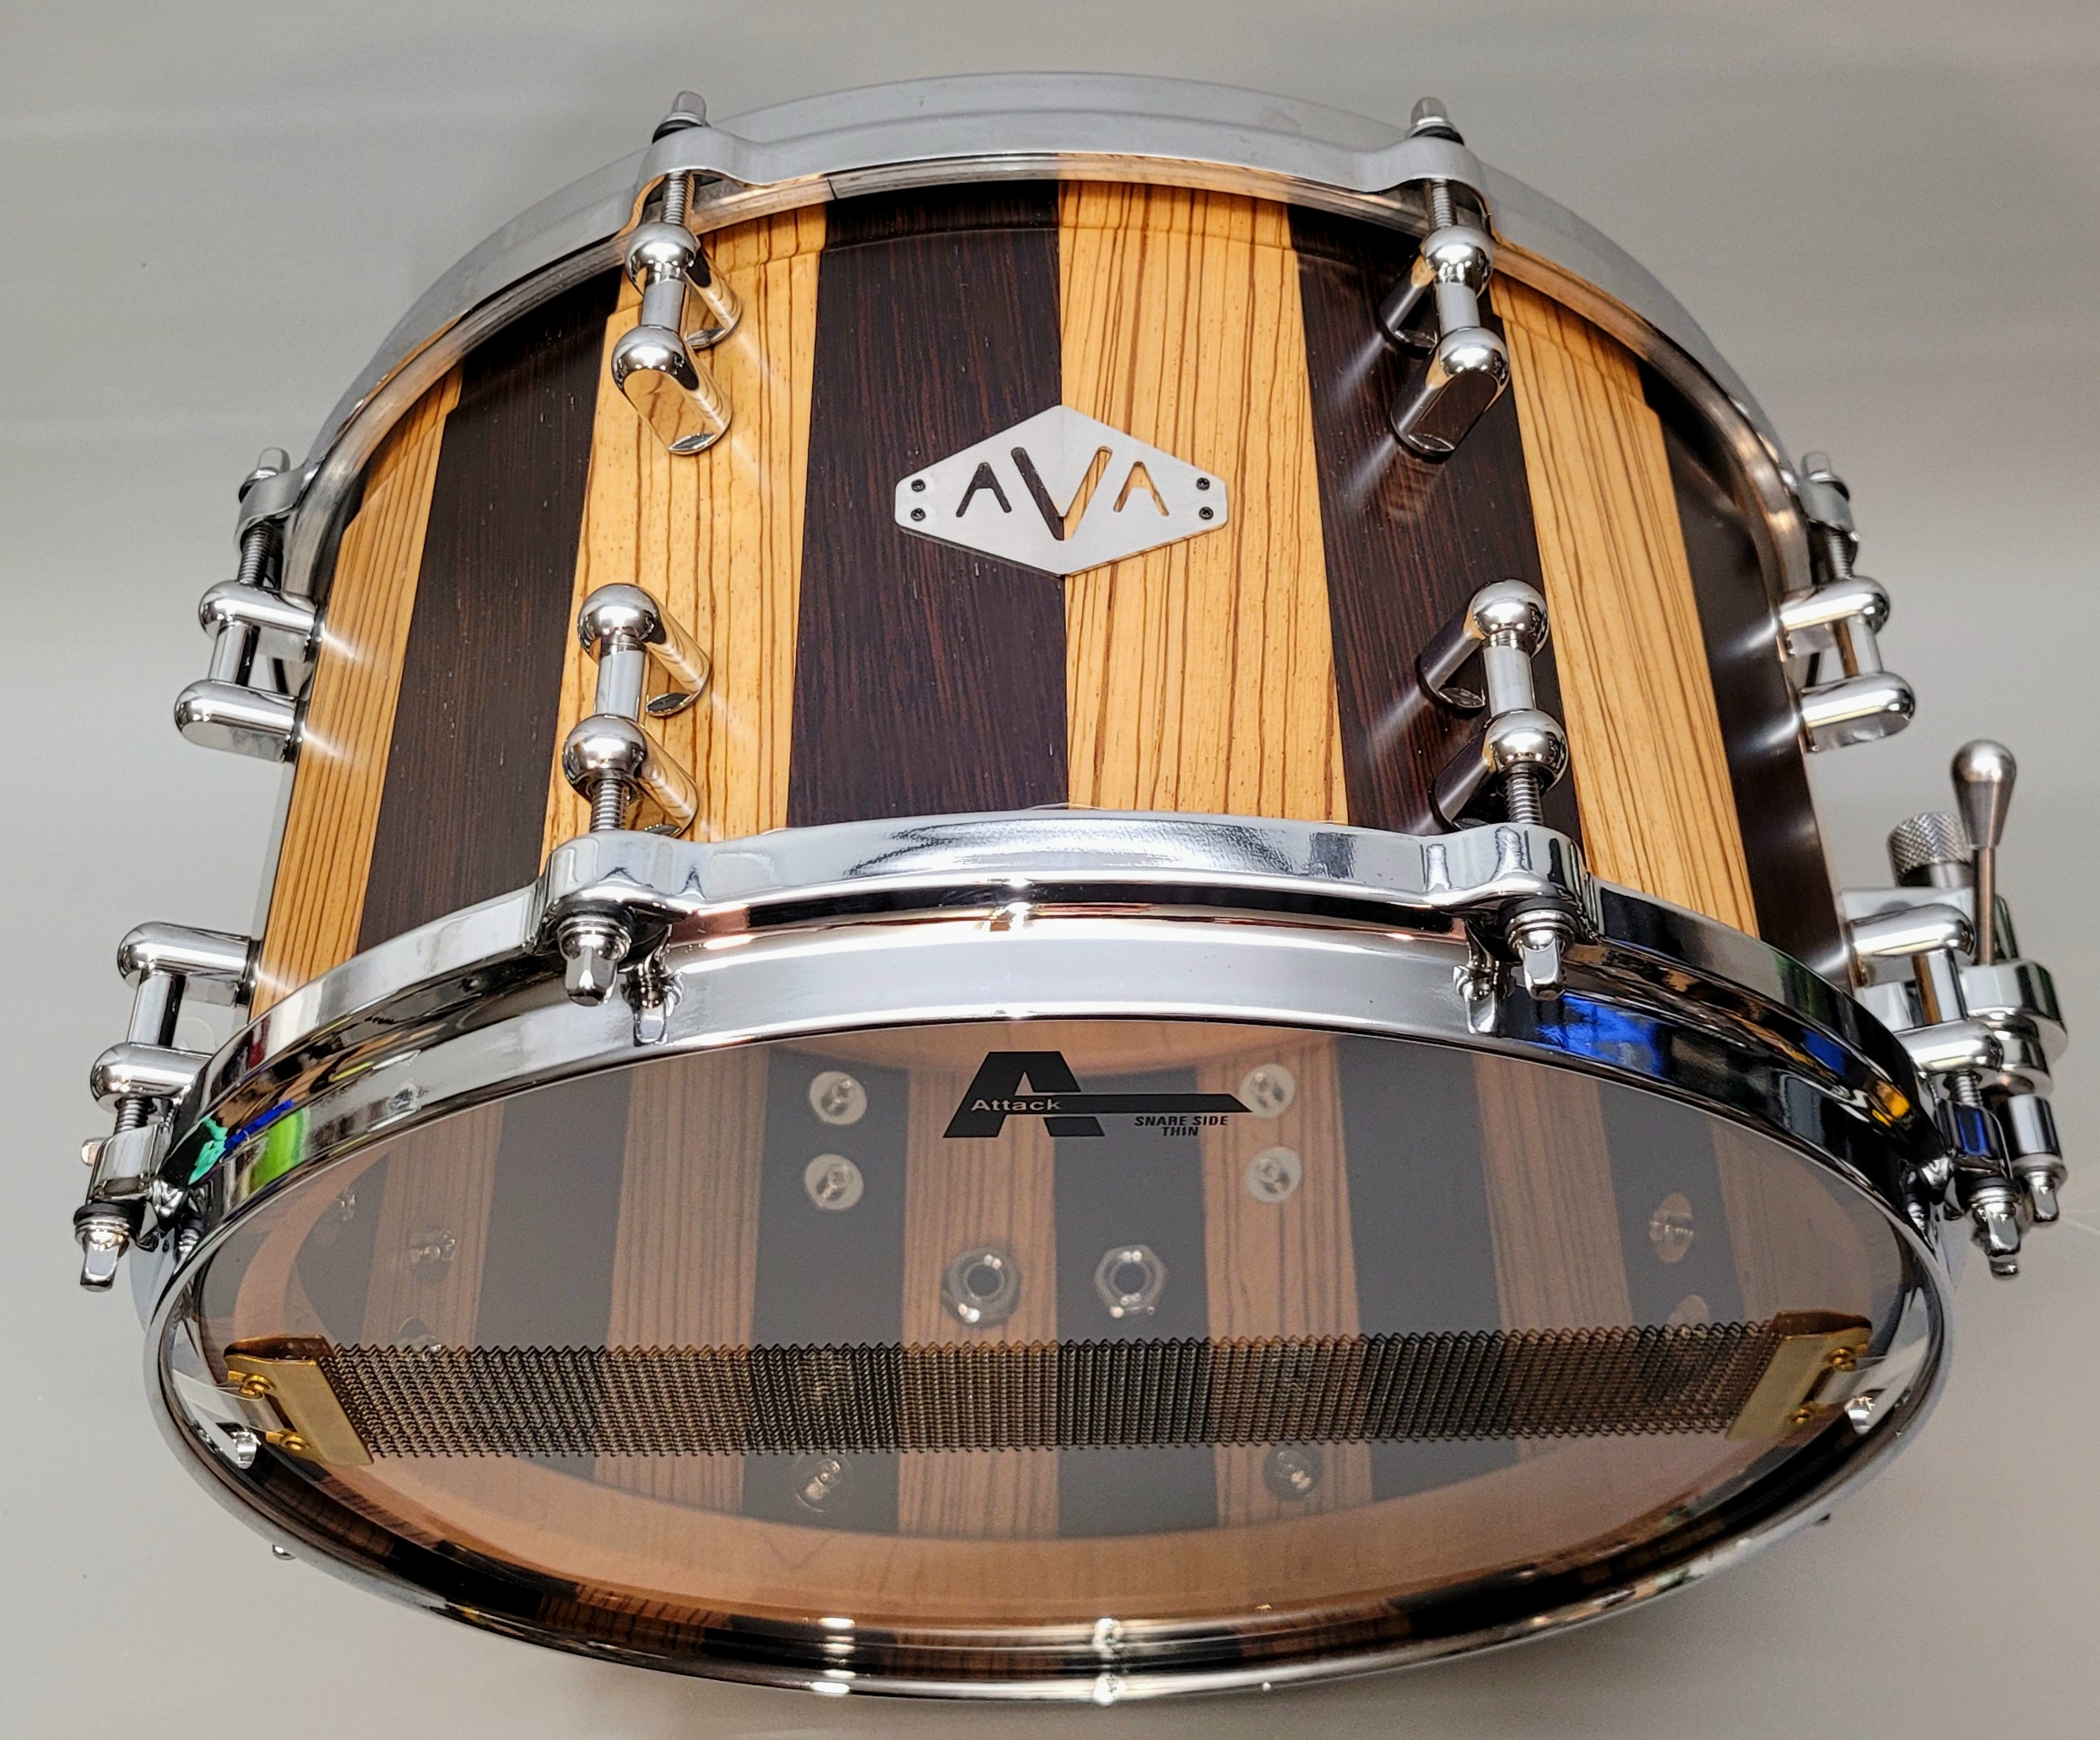 13 X 7 ZEBRAWOOD / WENGE    STABLE-STAVE